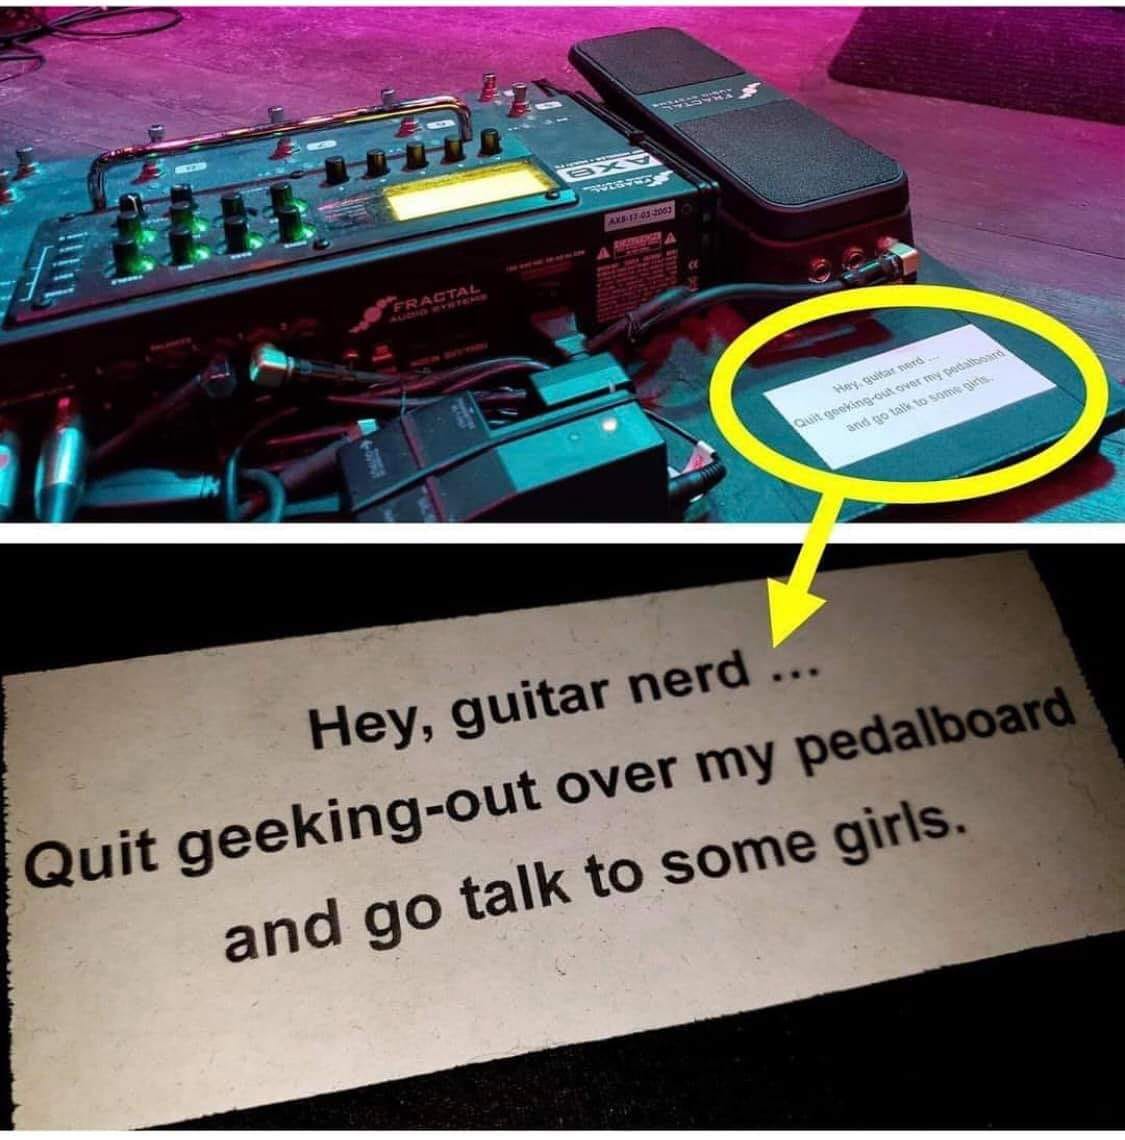 I should do that with my pedal boards